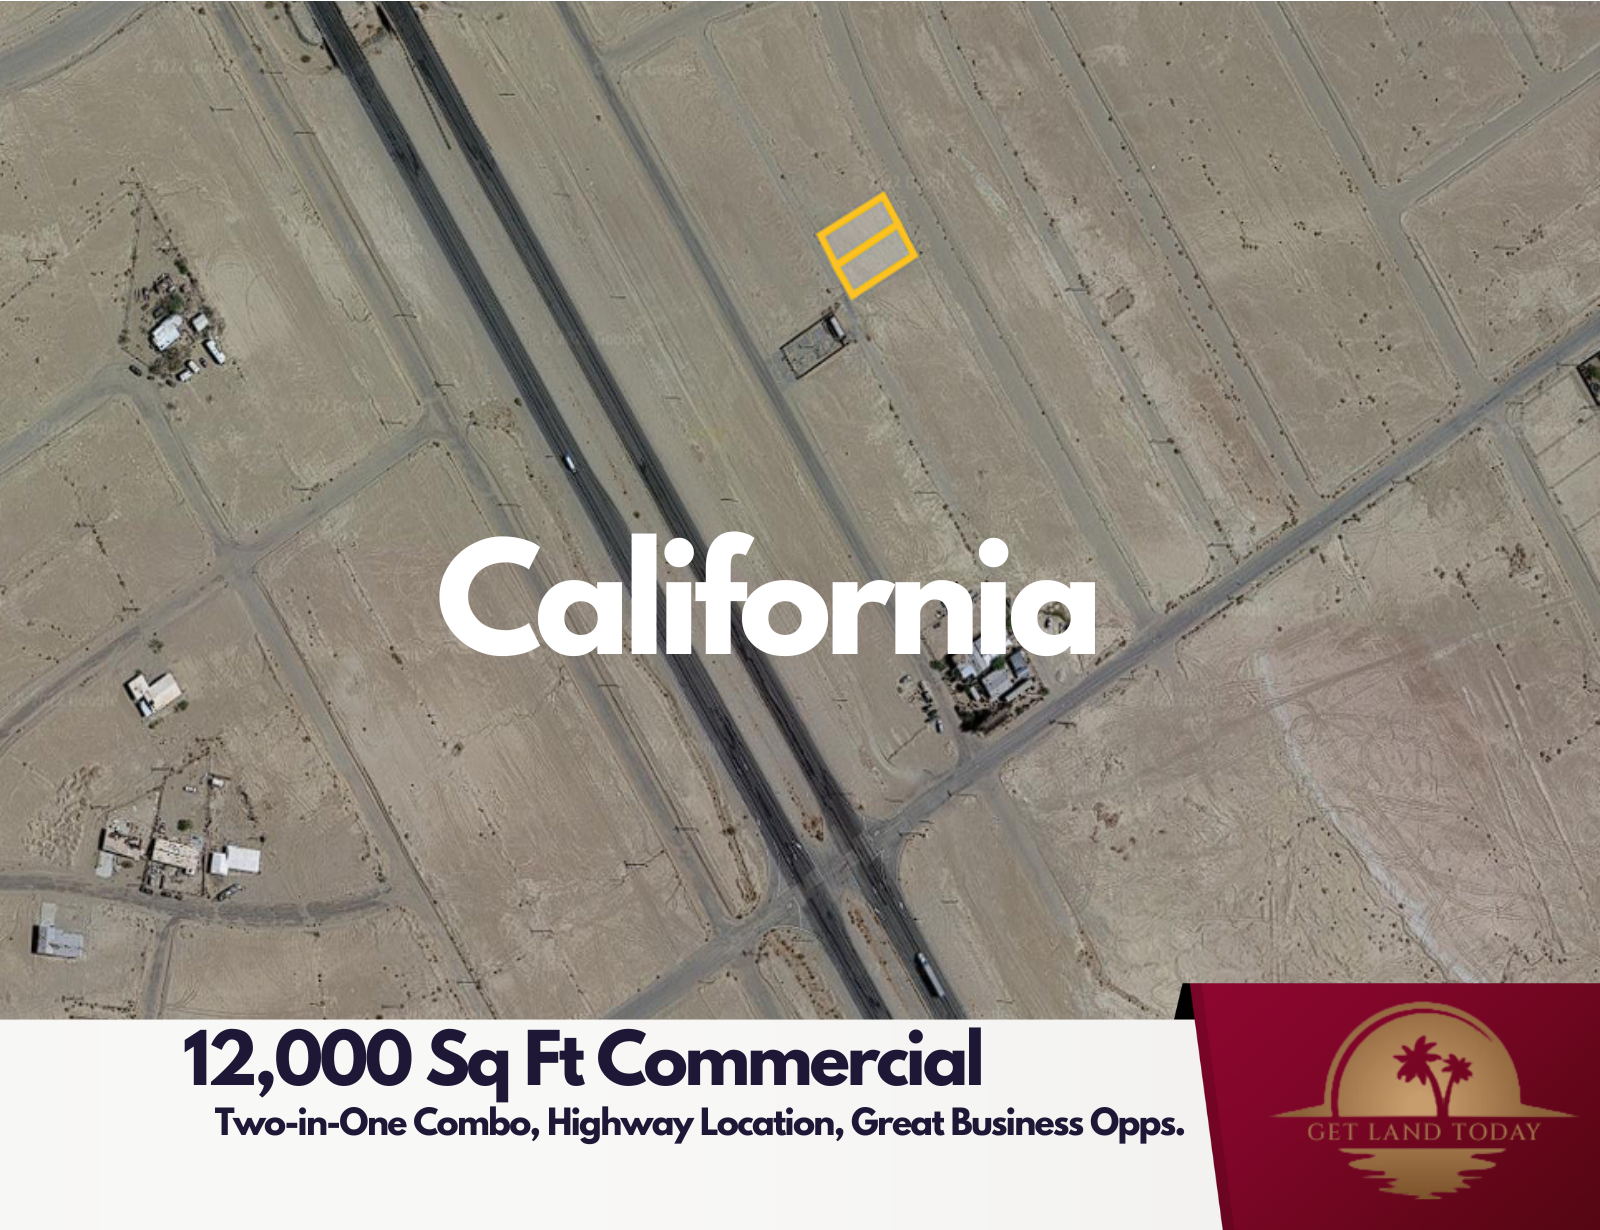 Premium Commercial Combo: 2 Lots on Berkley Ave in Salton City, CA! RIGHT OFF HIGHWAY | Low Monthly Payments of $400.00 | APN: 017-022-006-000 & 017-022-007-000 - Get Land Today